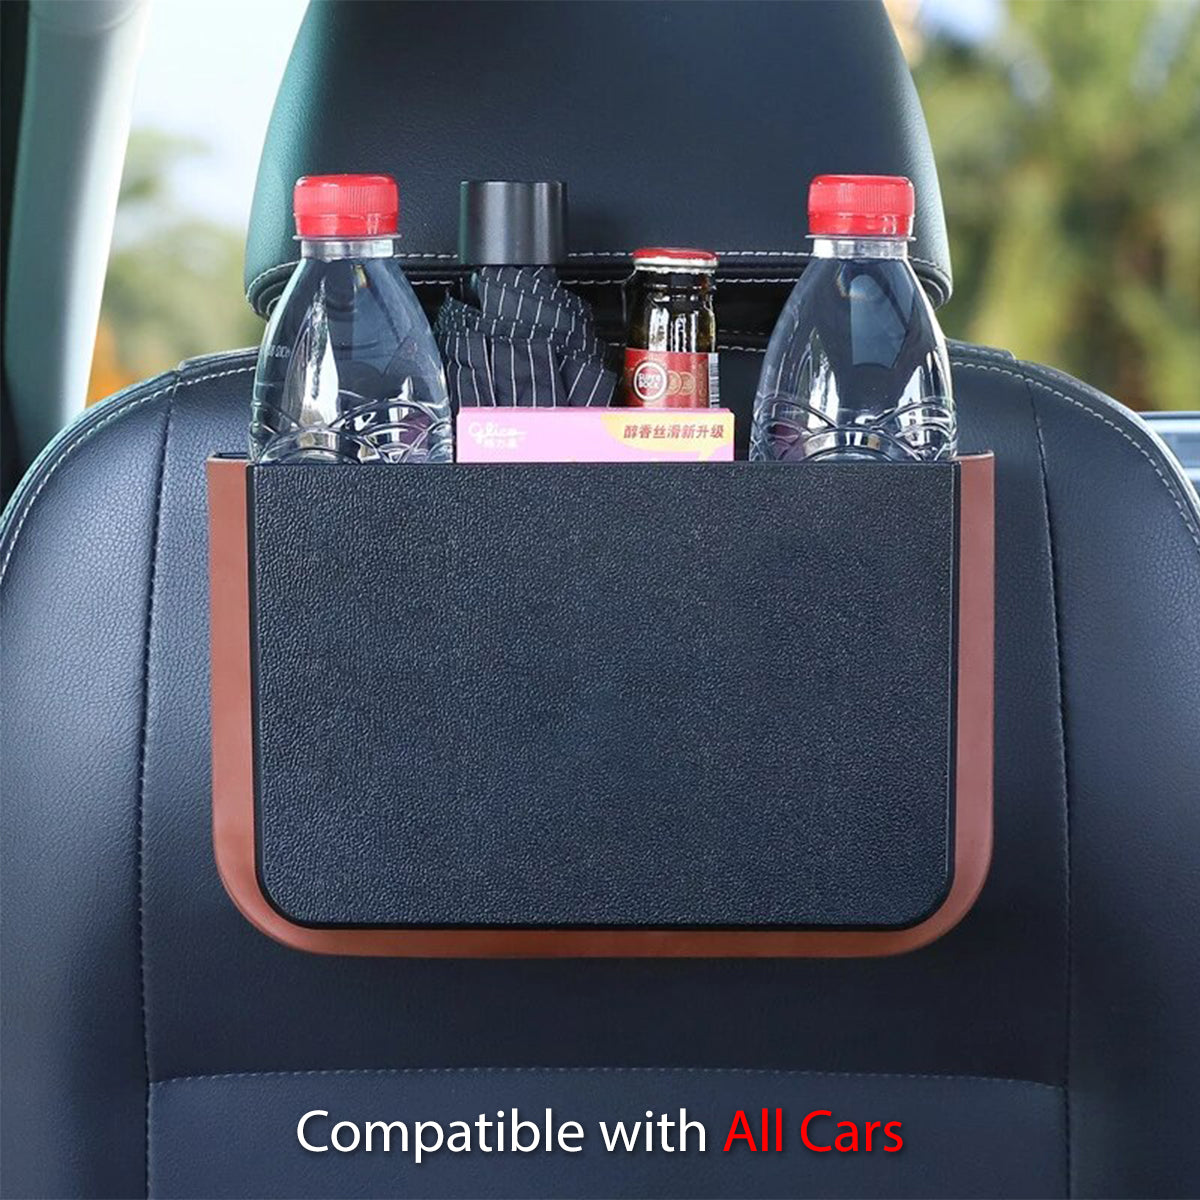 Hanging Waterproof Car Trash can-Foldable, Custom For Your Cars, Waterproof, and Equipped with Cup Holders and Trays. Multi-Purpose, Car Accessories AR11992 - Delicate Leather